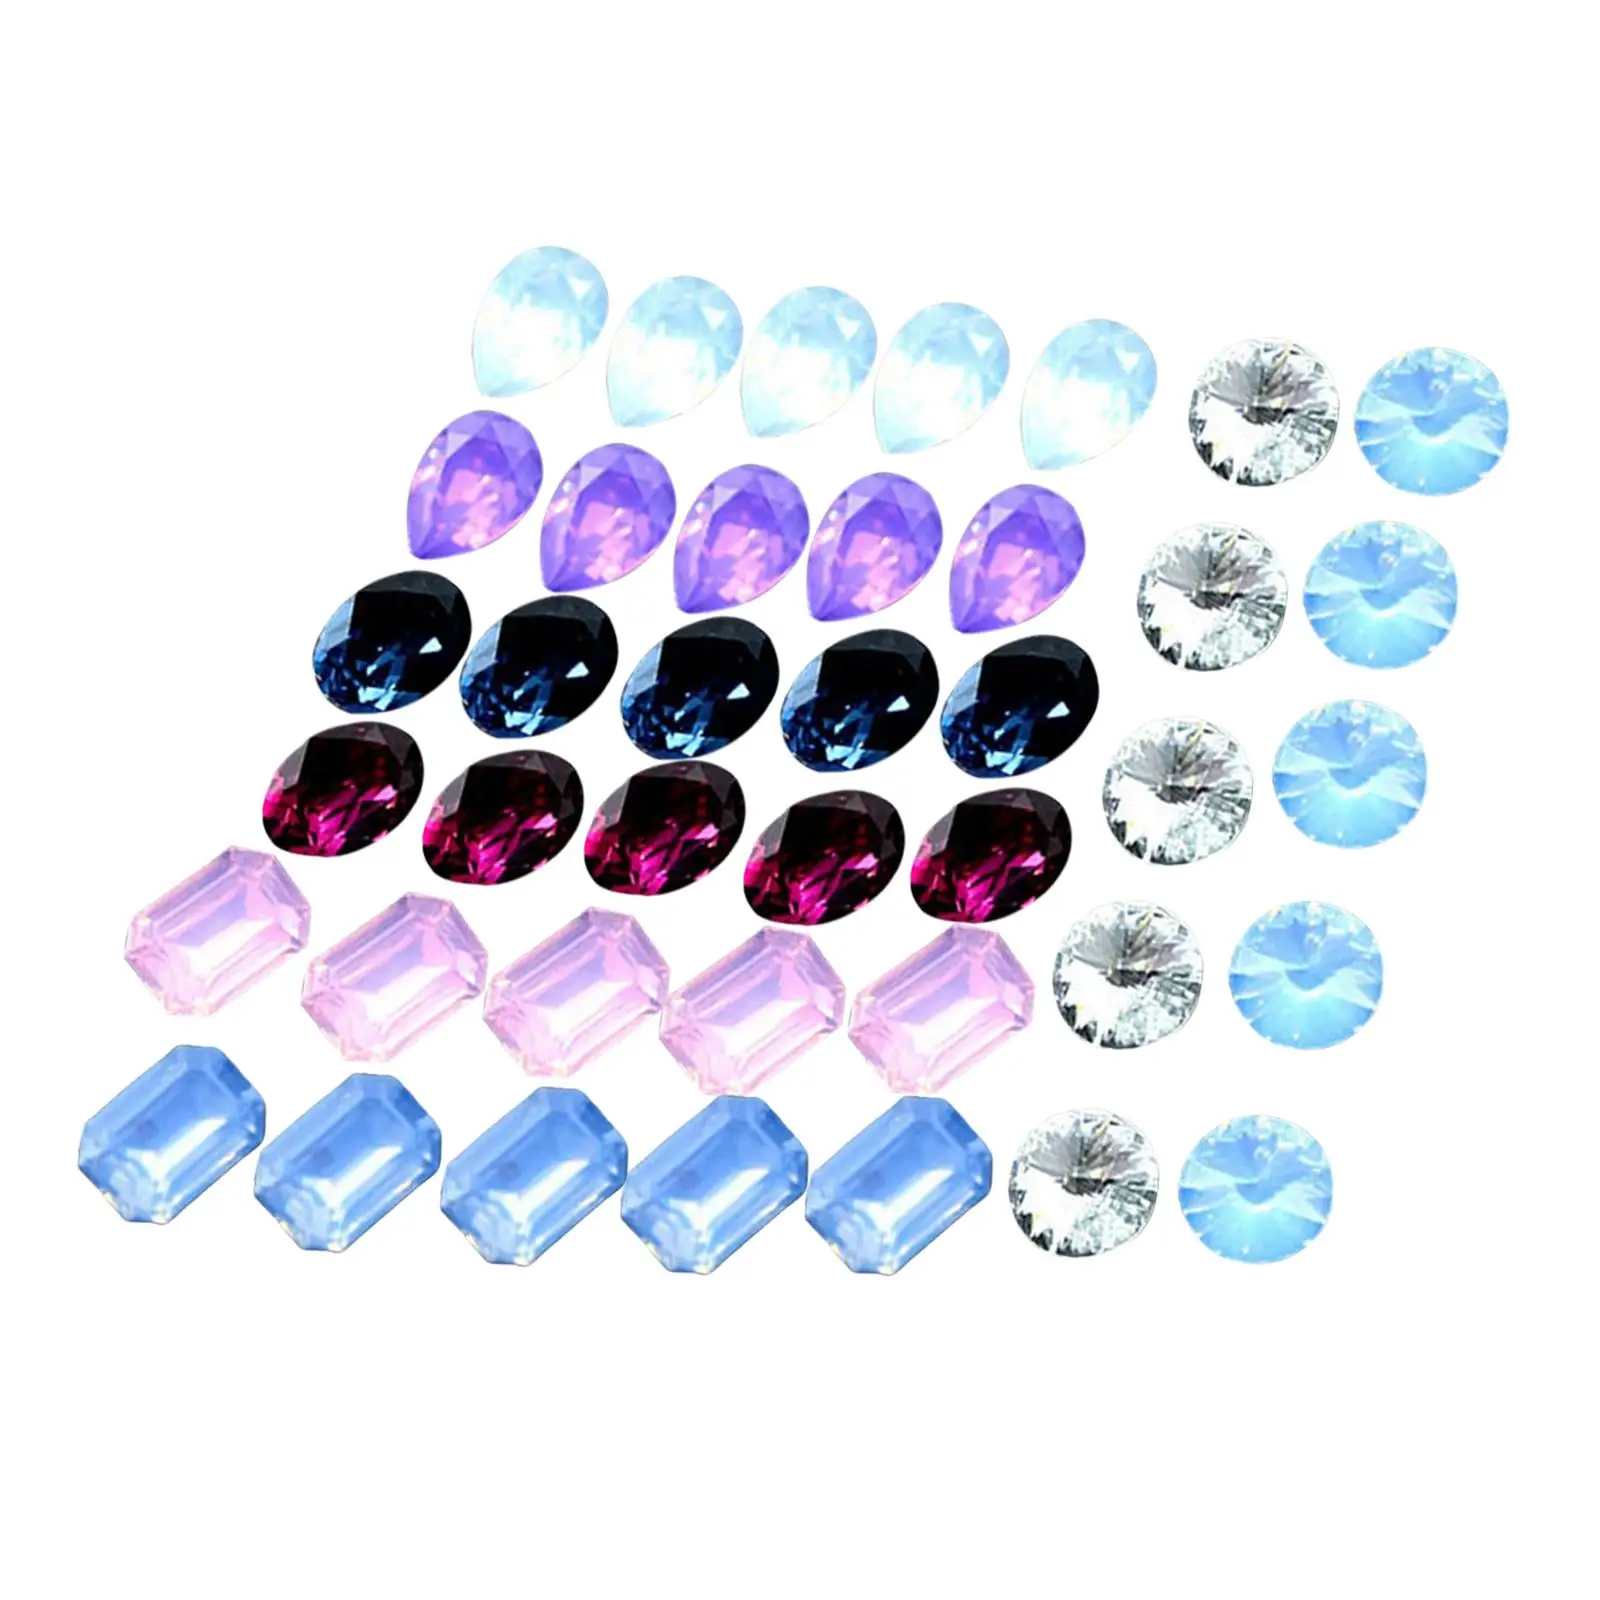 40 Pieces Fashion Resin Rhinestones Jewelry Making Necklace Hair Accessories Charms for Women Girls Mixed Color Craft Decoration